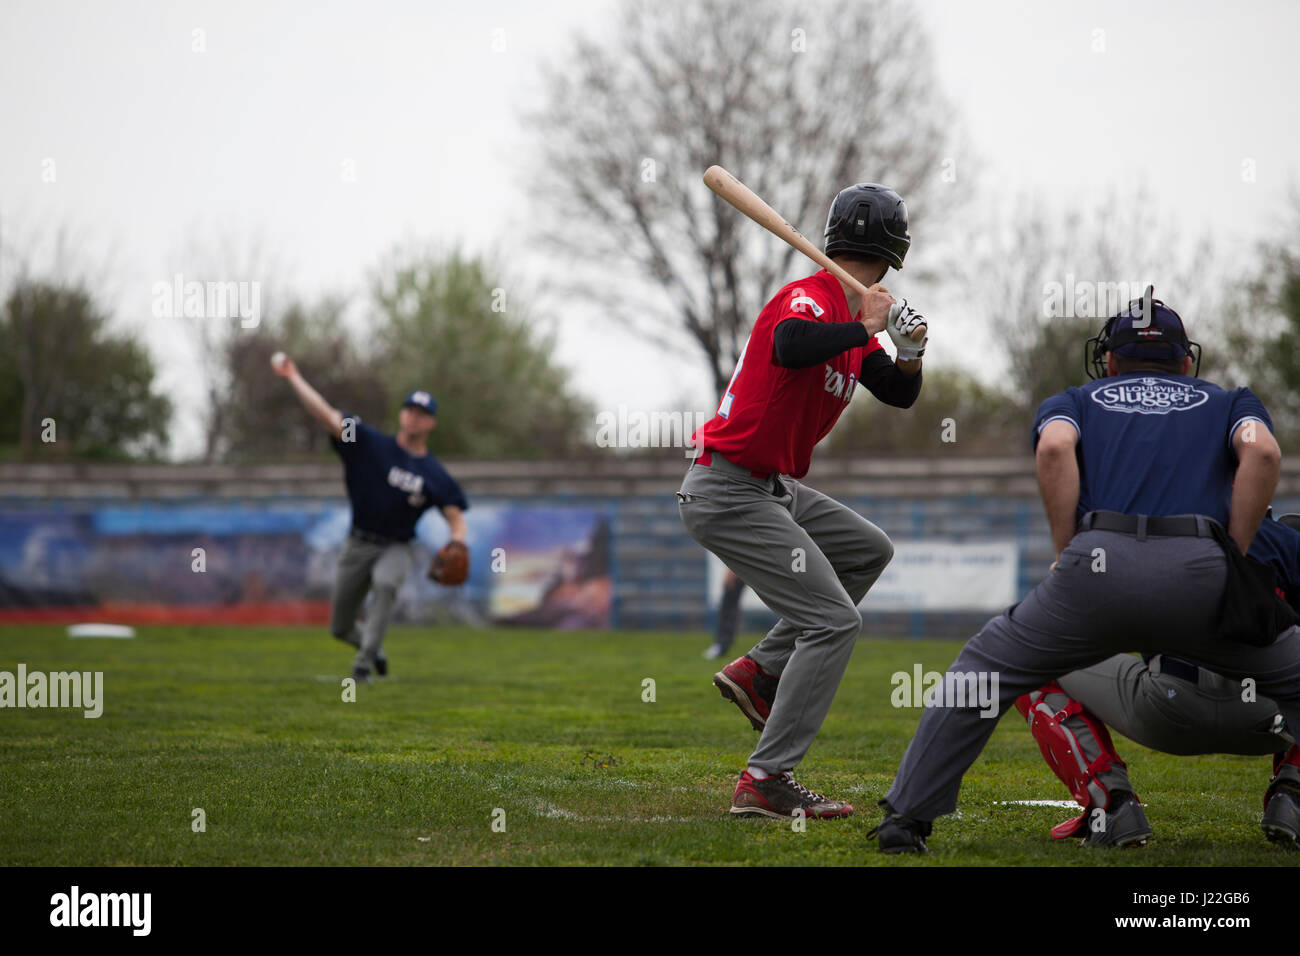 A U.S. Marine with the Black Sea Rotational Force 17.1 throws a pitch to a Romanian player at the Jackie Robinson Day baseball game between the U.S. Marines and a Romanian team in Constanta, Romania, April 15, 2017. The Marine and Romanian players all wore the number 42 jersey in honor of the 70th anniversary of Robinson becoming the first African American player in the Major League Baseball history. (U.S. Marine Corps photo by Cpl. Emily Dorumsgaard) Stock Photo